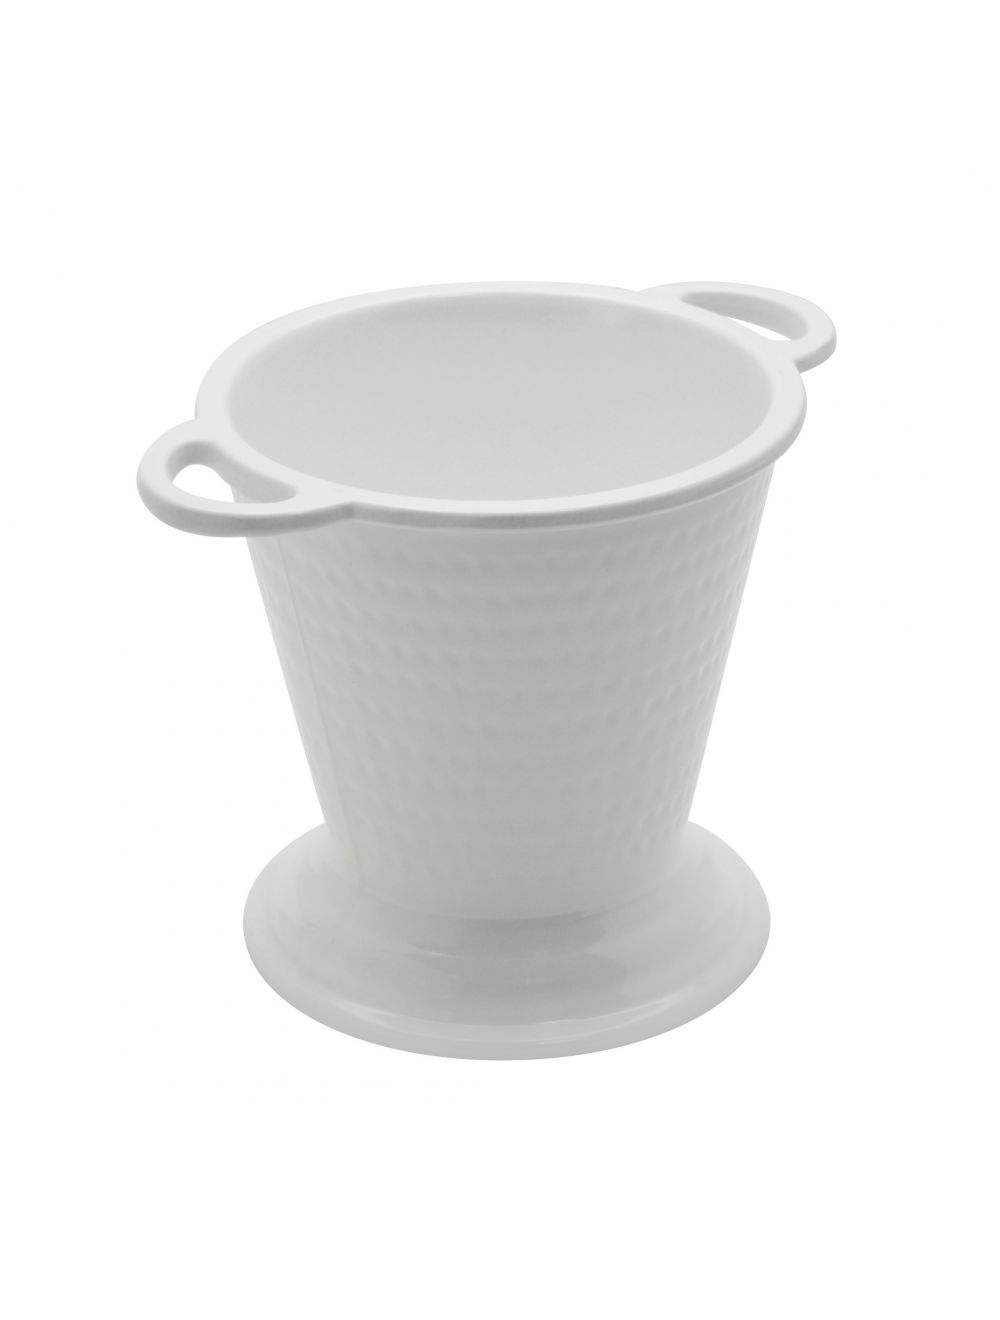 Dinewell Melamine Serving Bucket White-DWH3033W